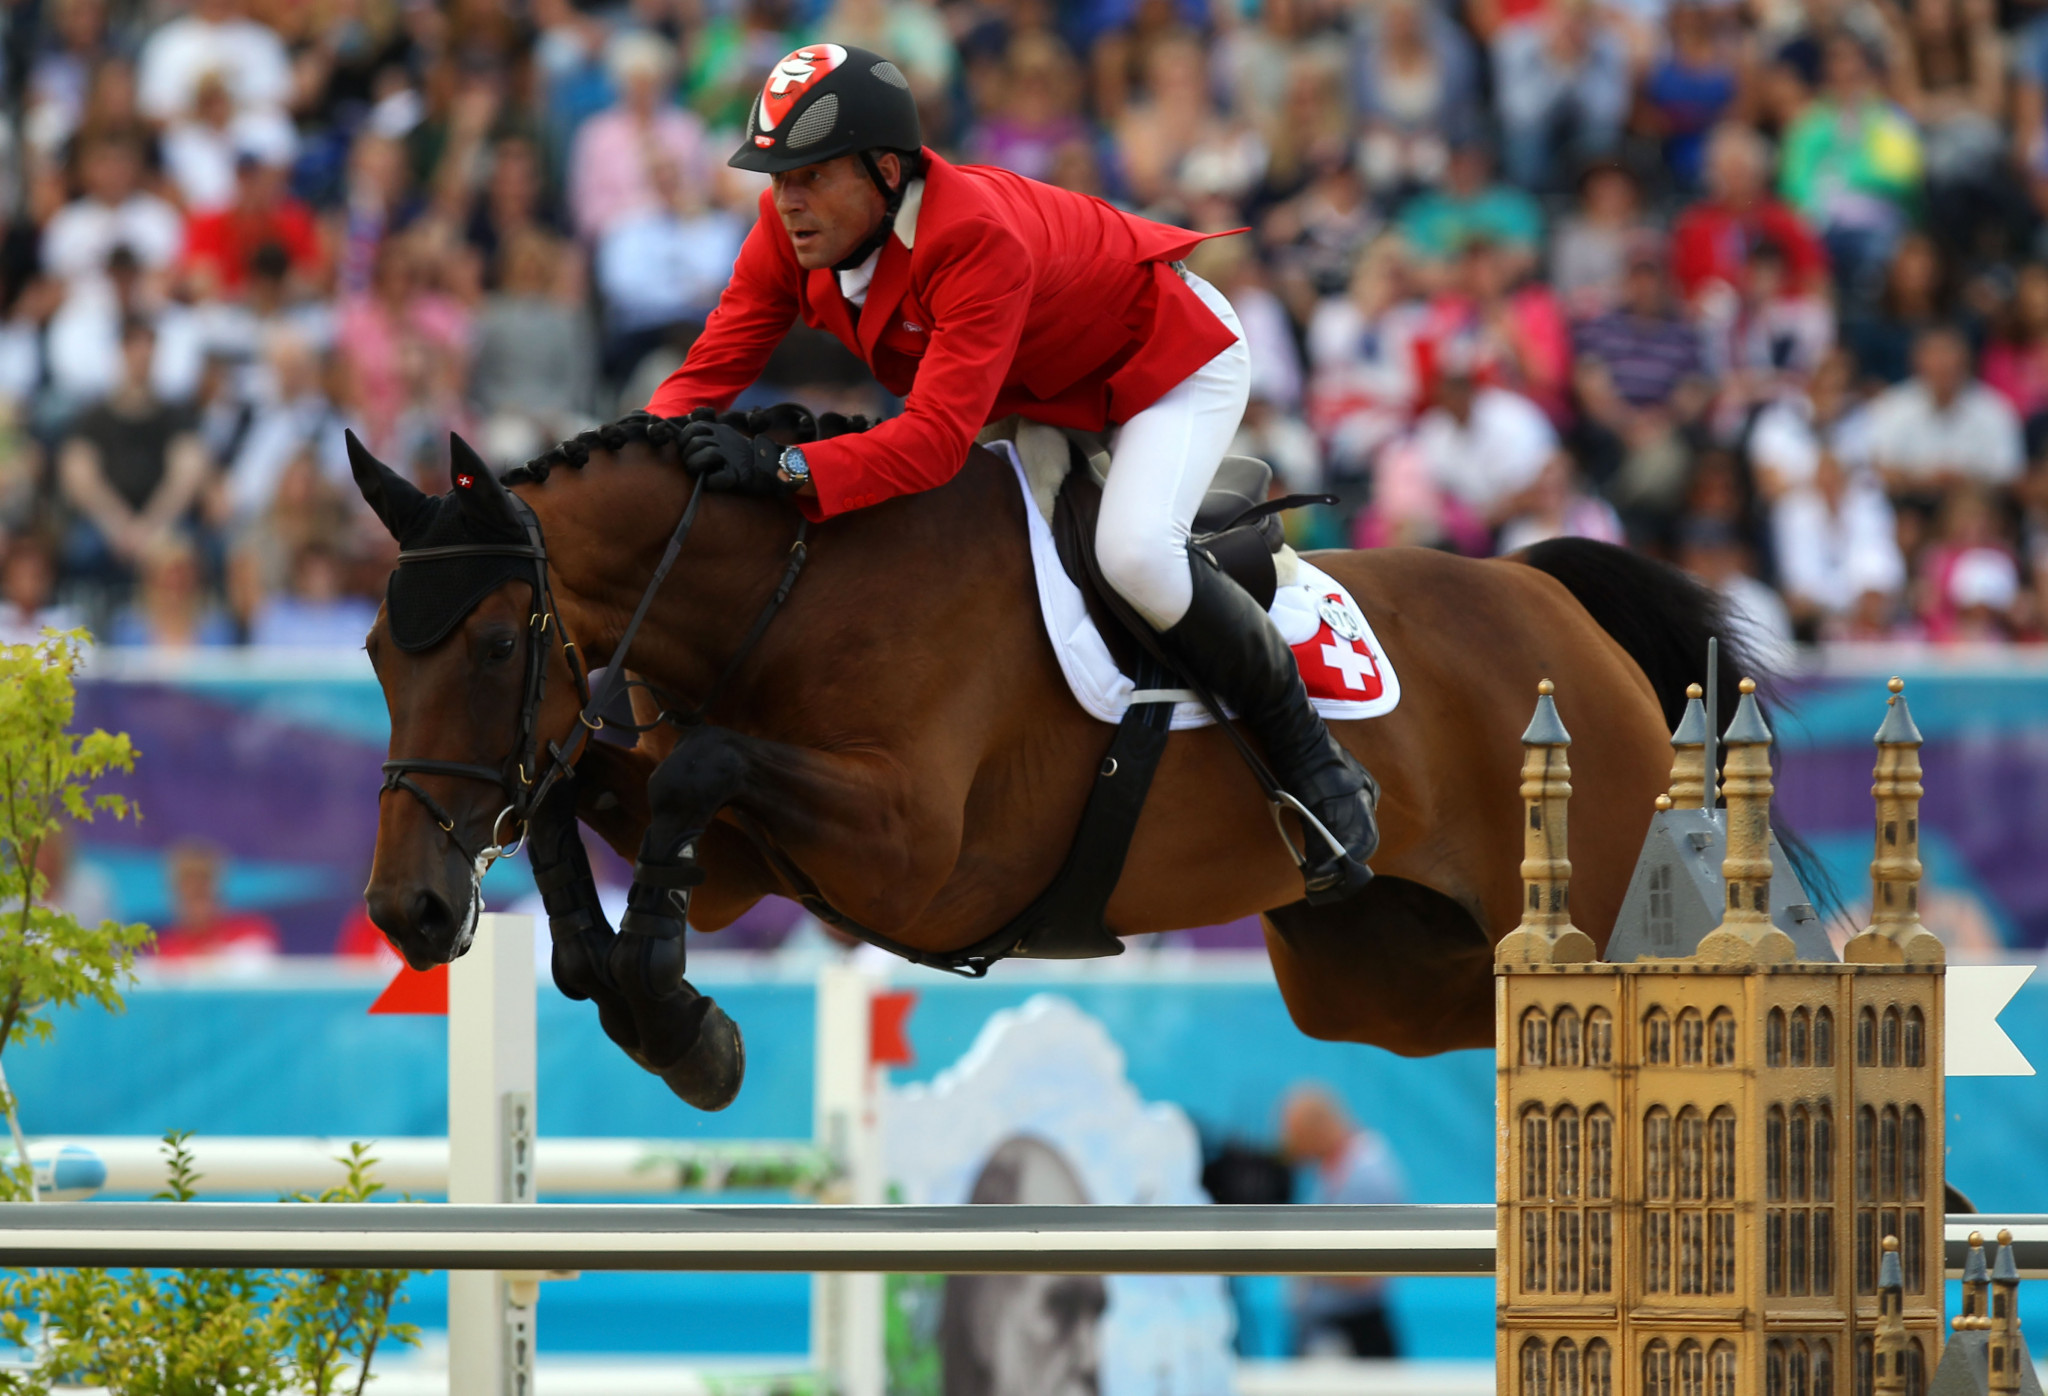 Paul Estermann riding Castlefield Eclipse during the London 2012 Olympics ©Getty Images